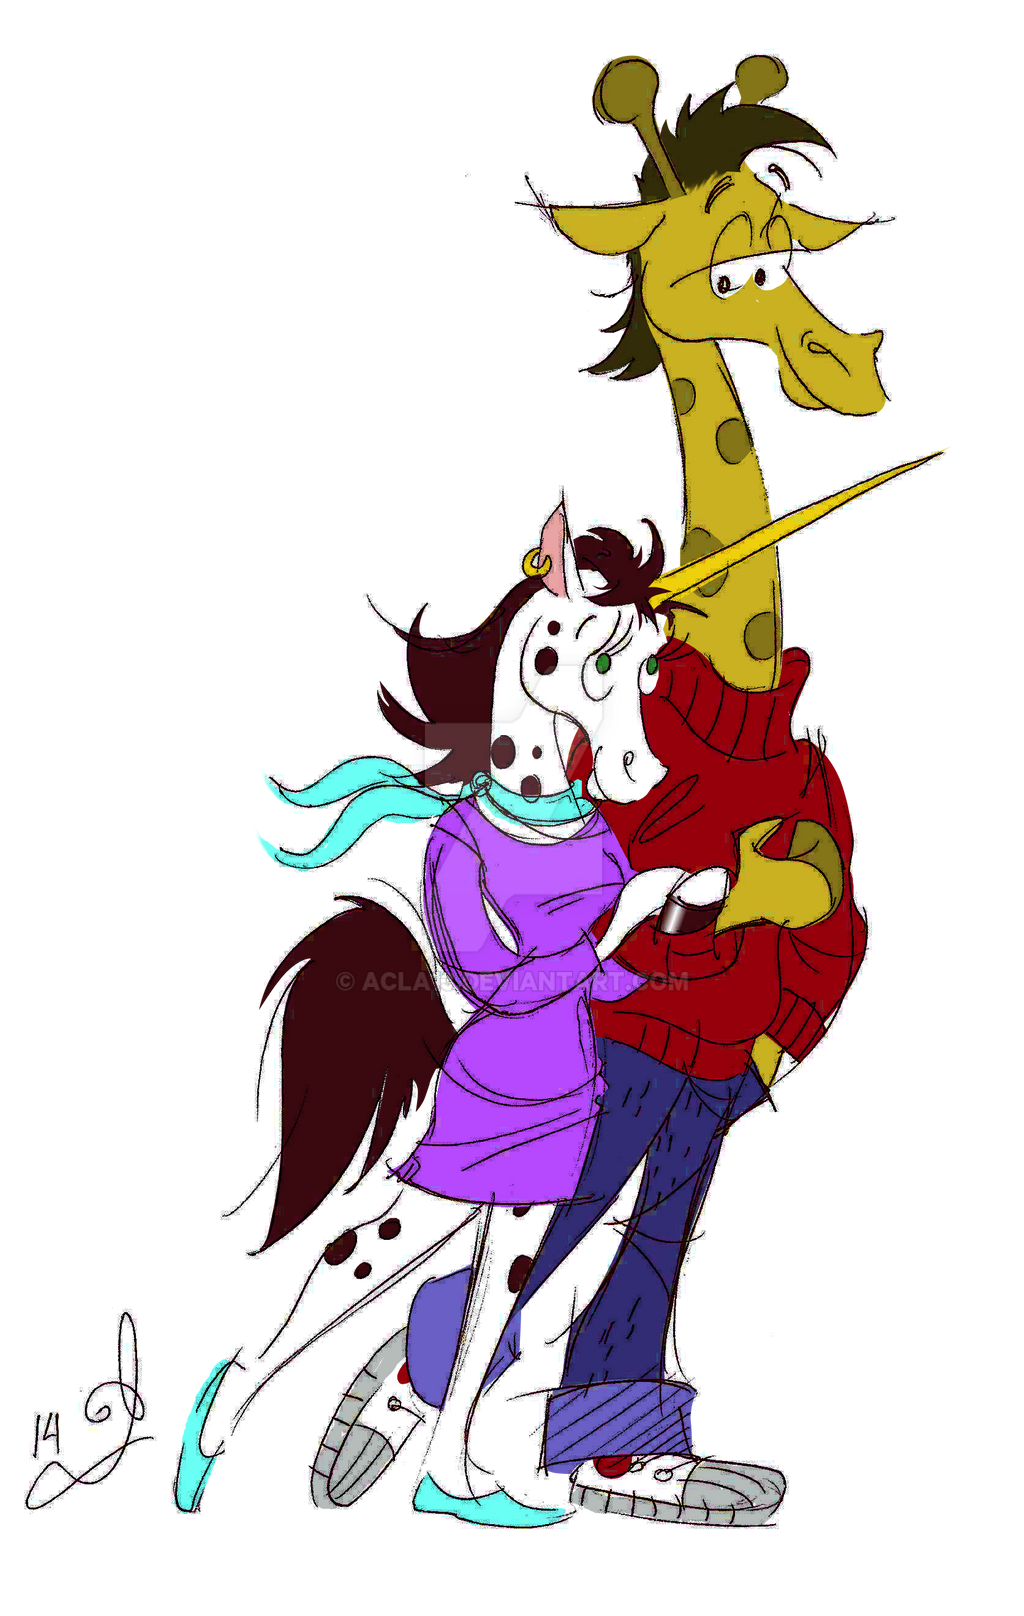 A Mythical and Cool Couple